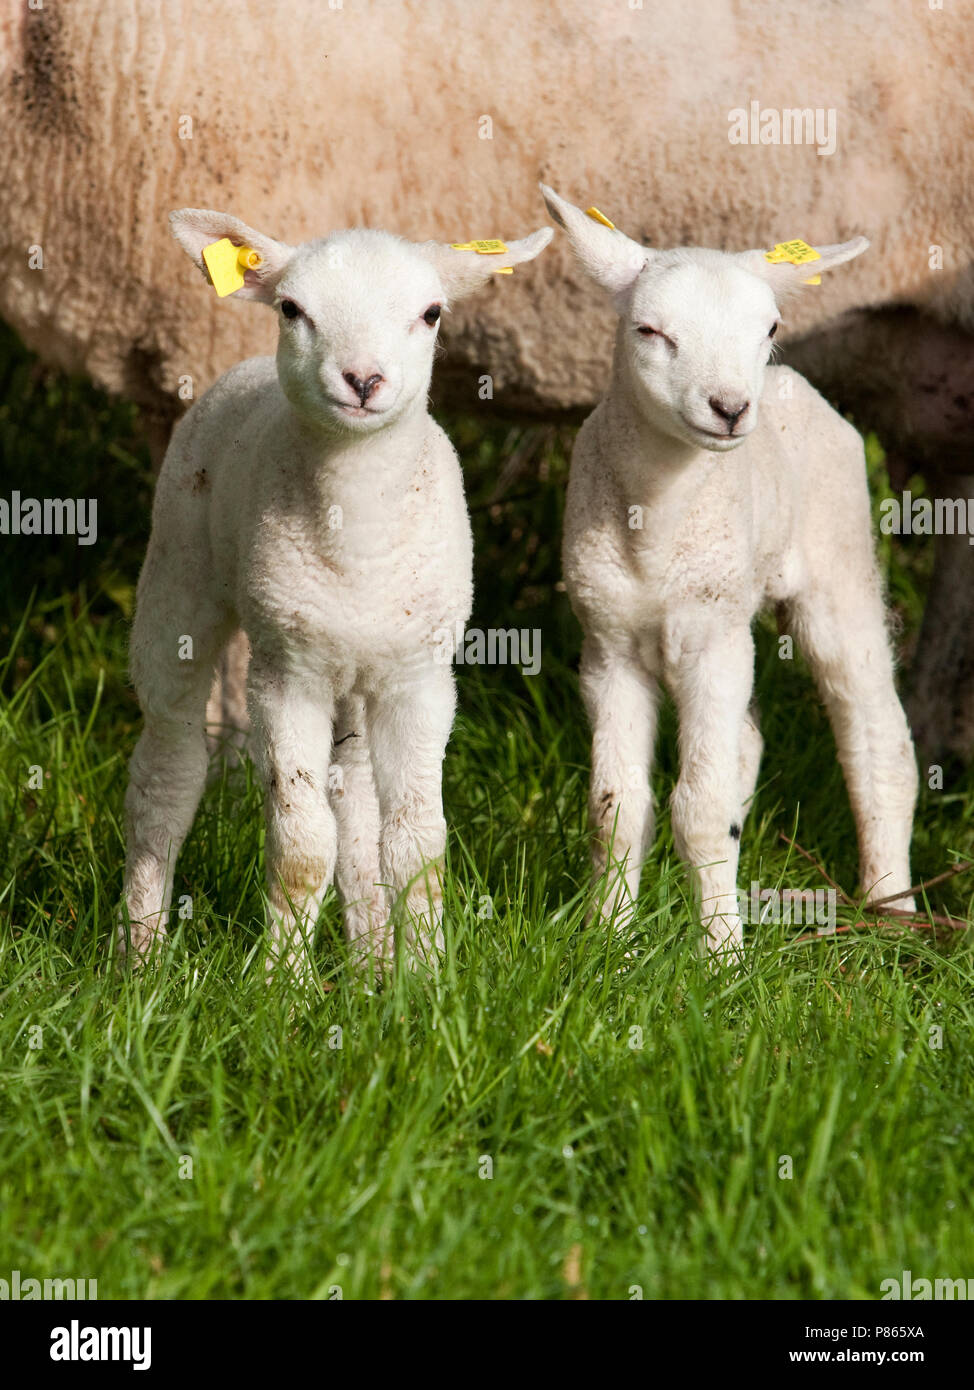 Afwijken over spek Page 2 - Schaap High Resolution Stock Photography and Images - Alamy